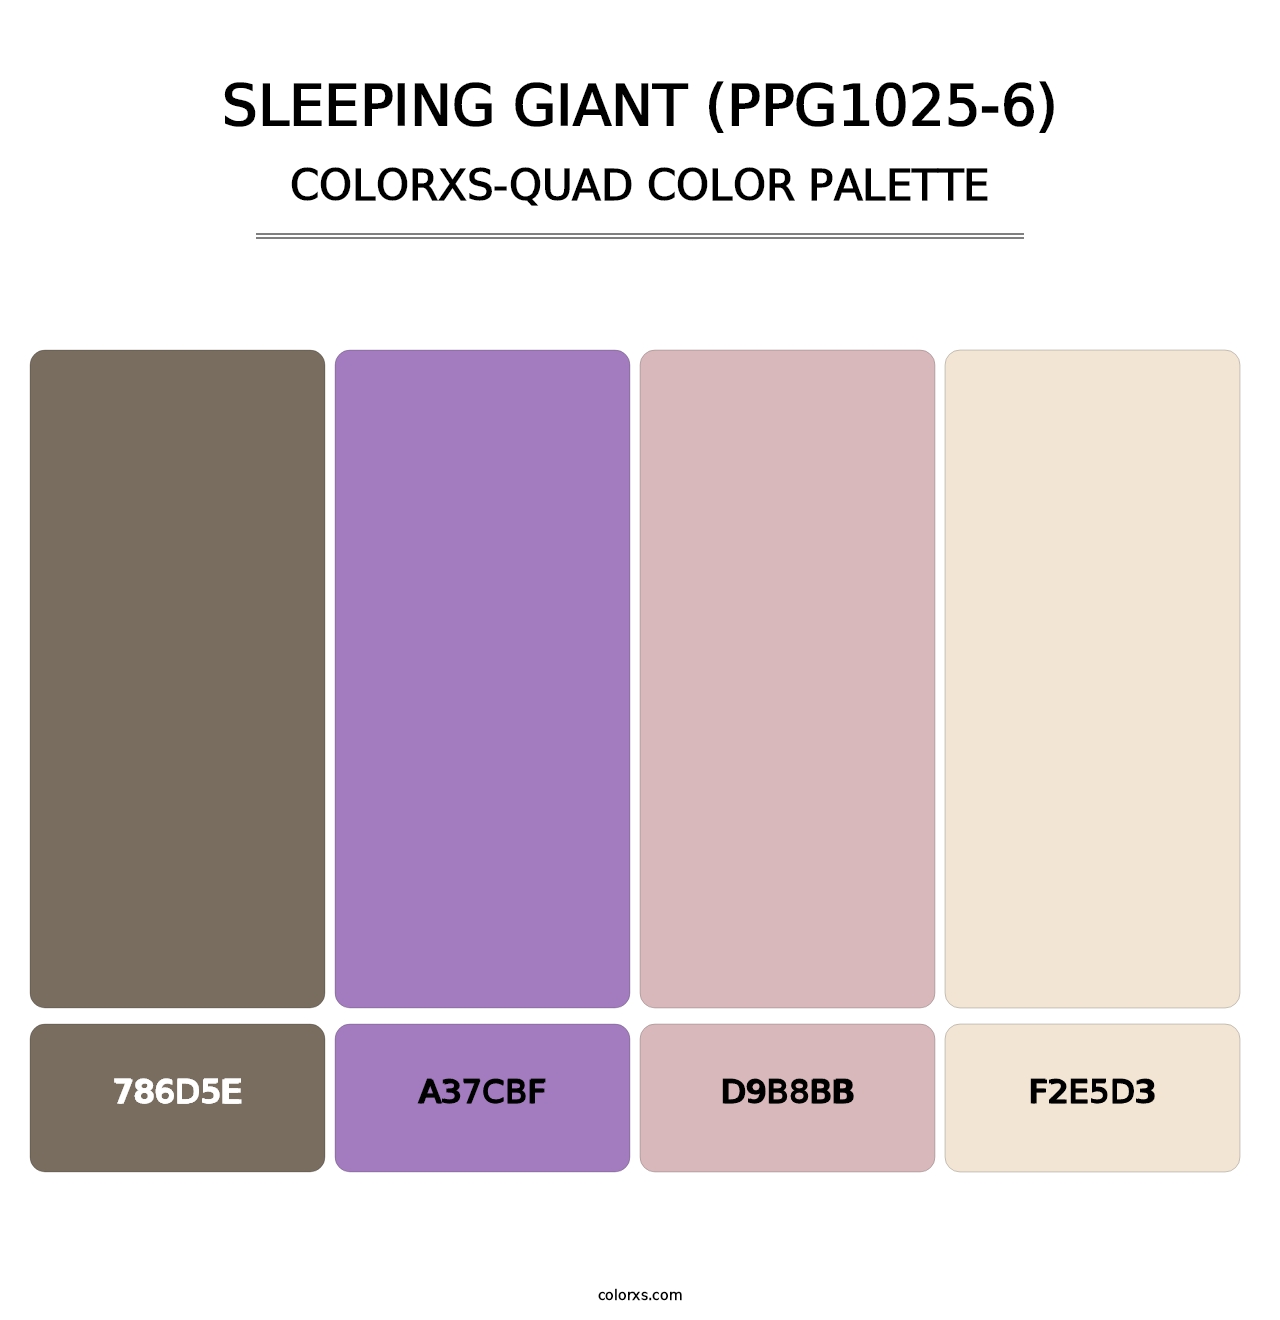 Sleeping Giant (PPG1025-6) - Colorxs Quad Palette